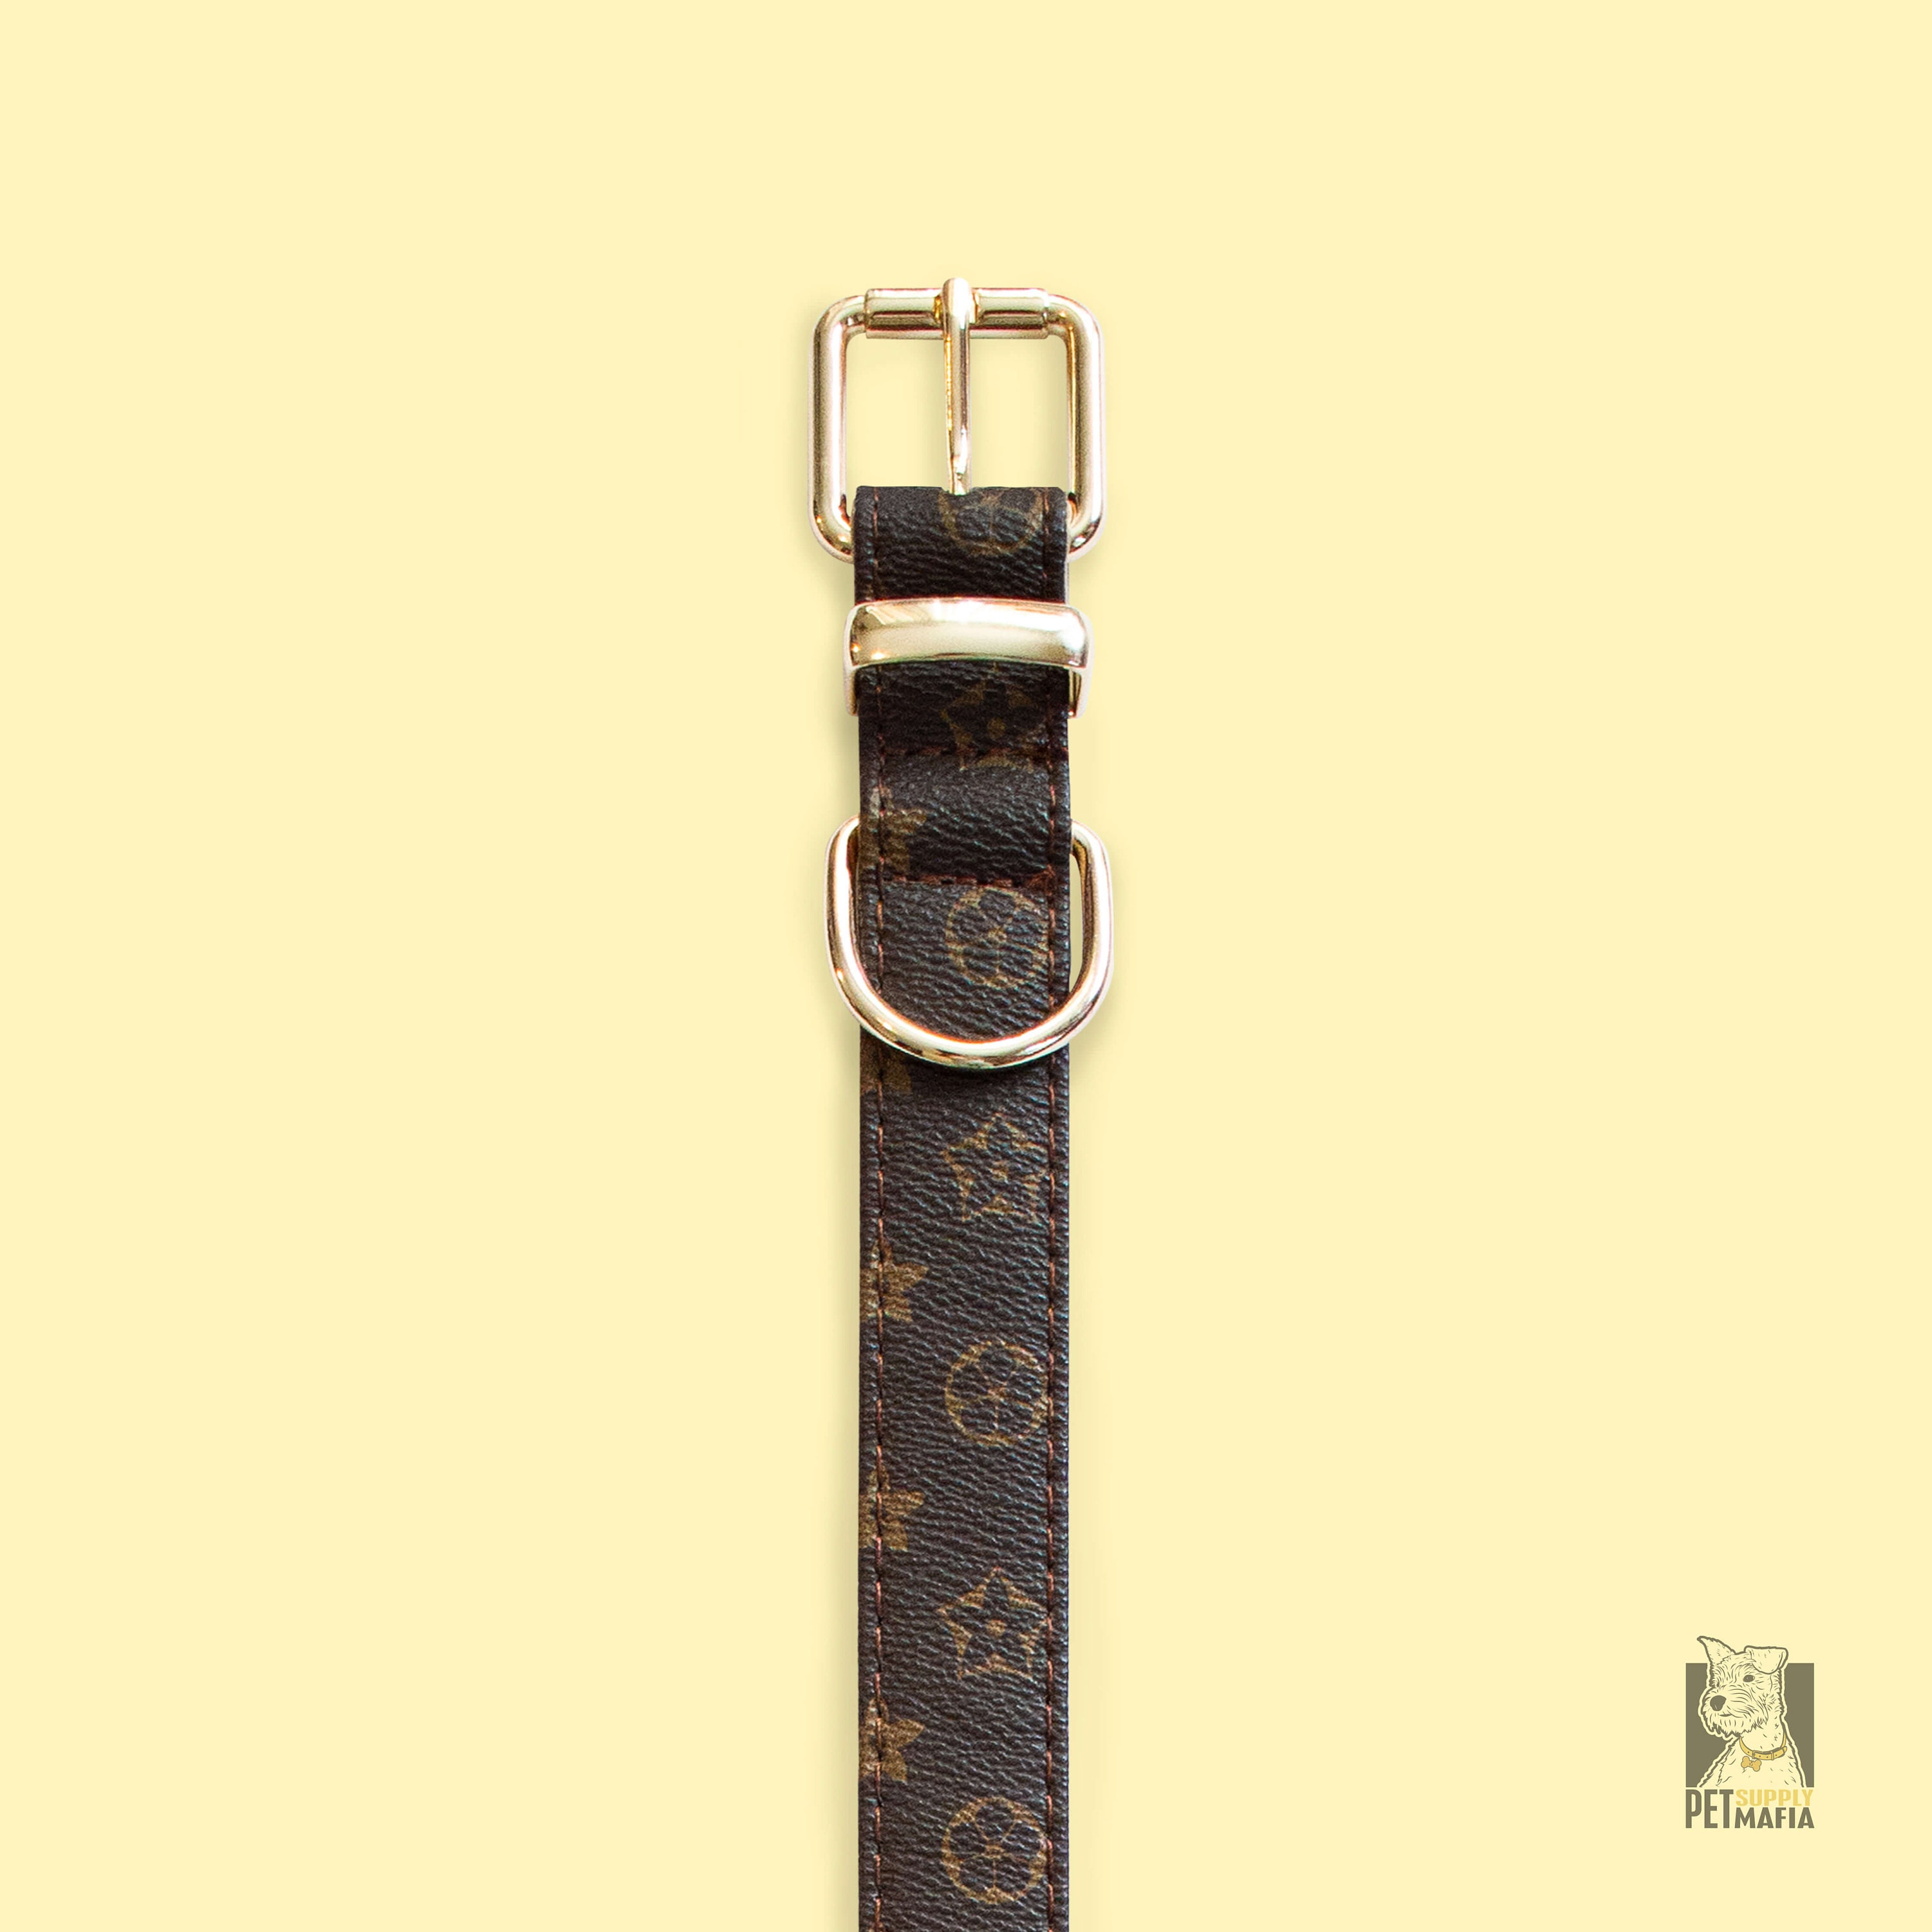 Drip Dog Classic LV Harness and Leash